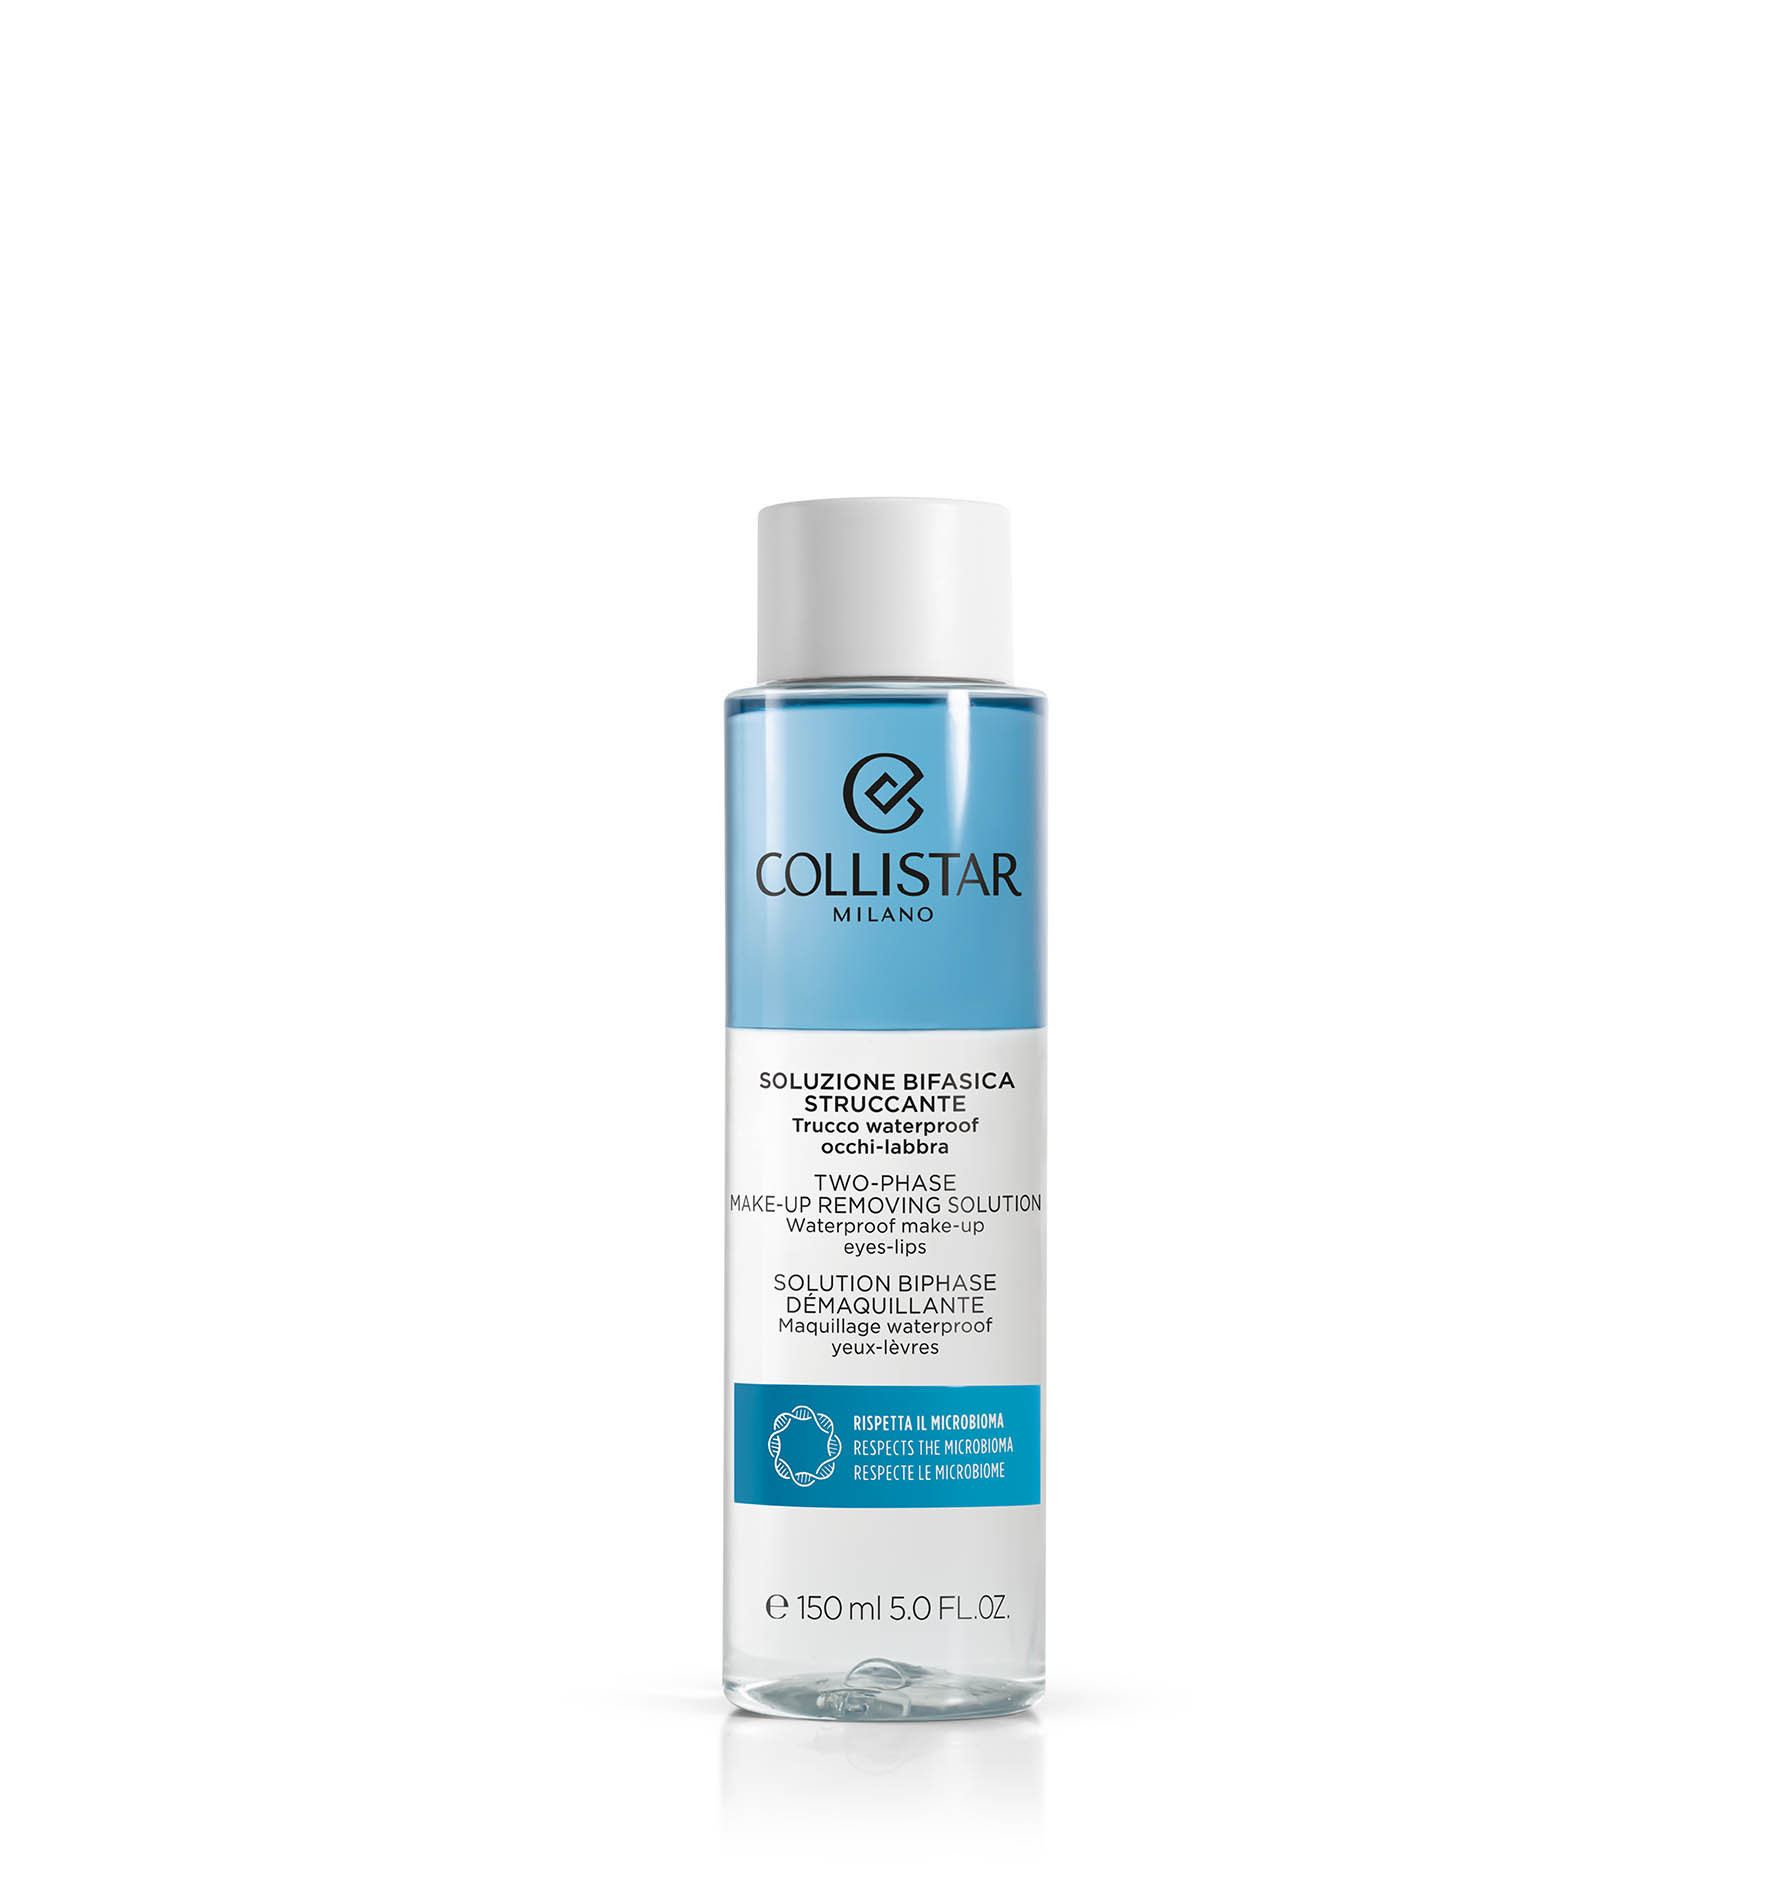 TWO-PHASE MAKE-UP REMOVING SOLUTION - NEW | Collistar - Shop Online Ufficiale